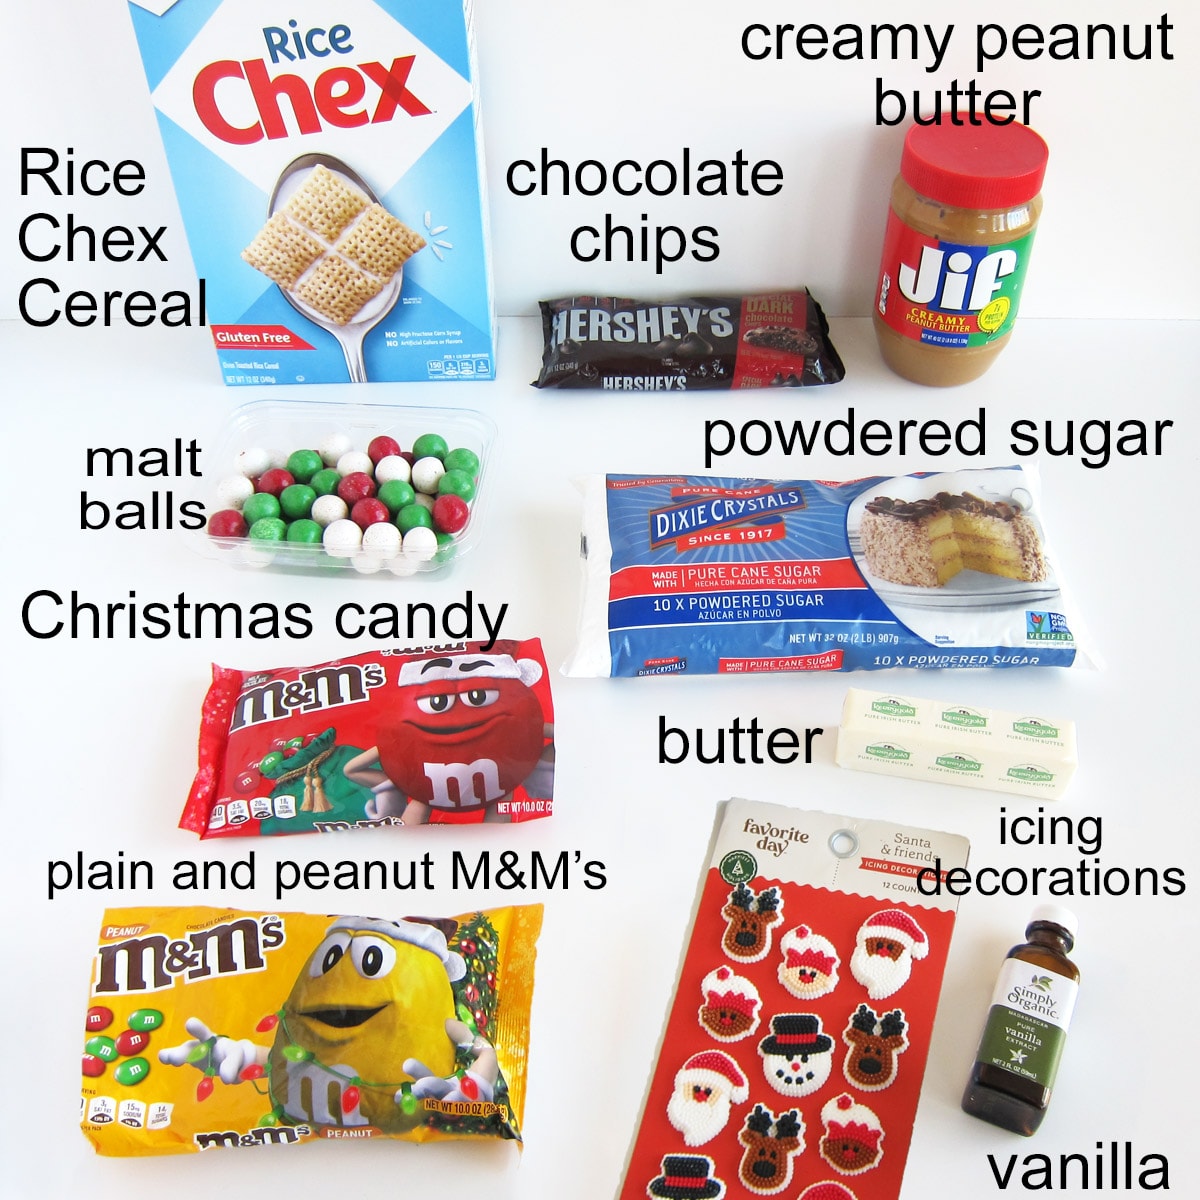 Christmas puppy chow ingredients including Rice Chex Cereal, chocolate chips, creamy peanut butter, powdered sugar, butter, vanilla, and Christmas candy including M&M's, malt balls, and icing decorations.